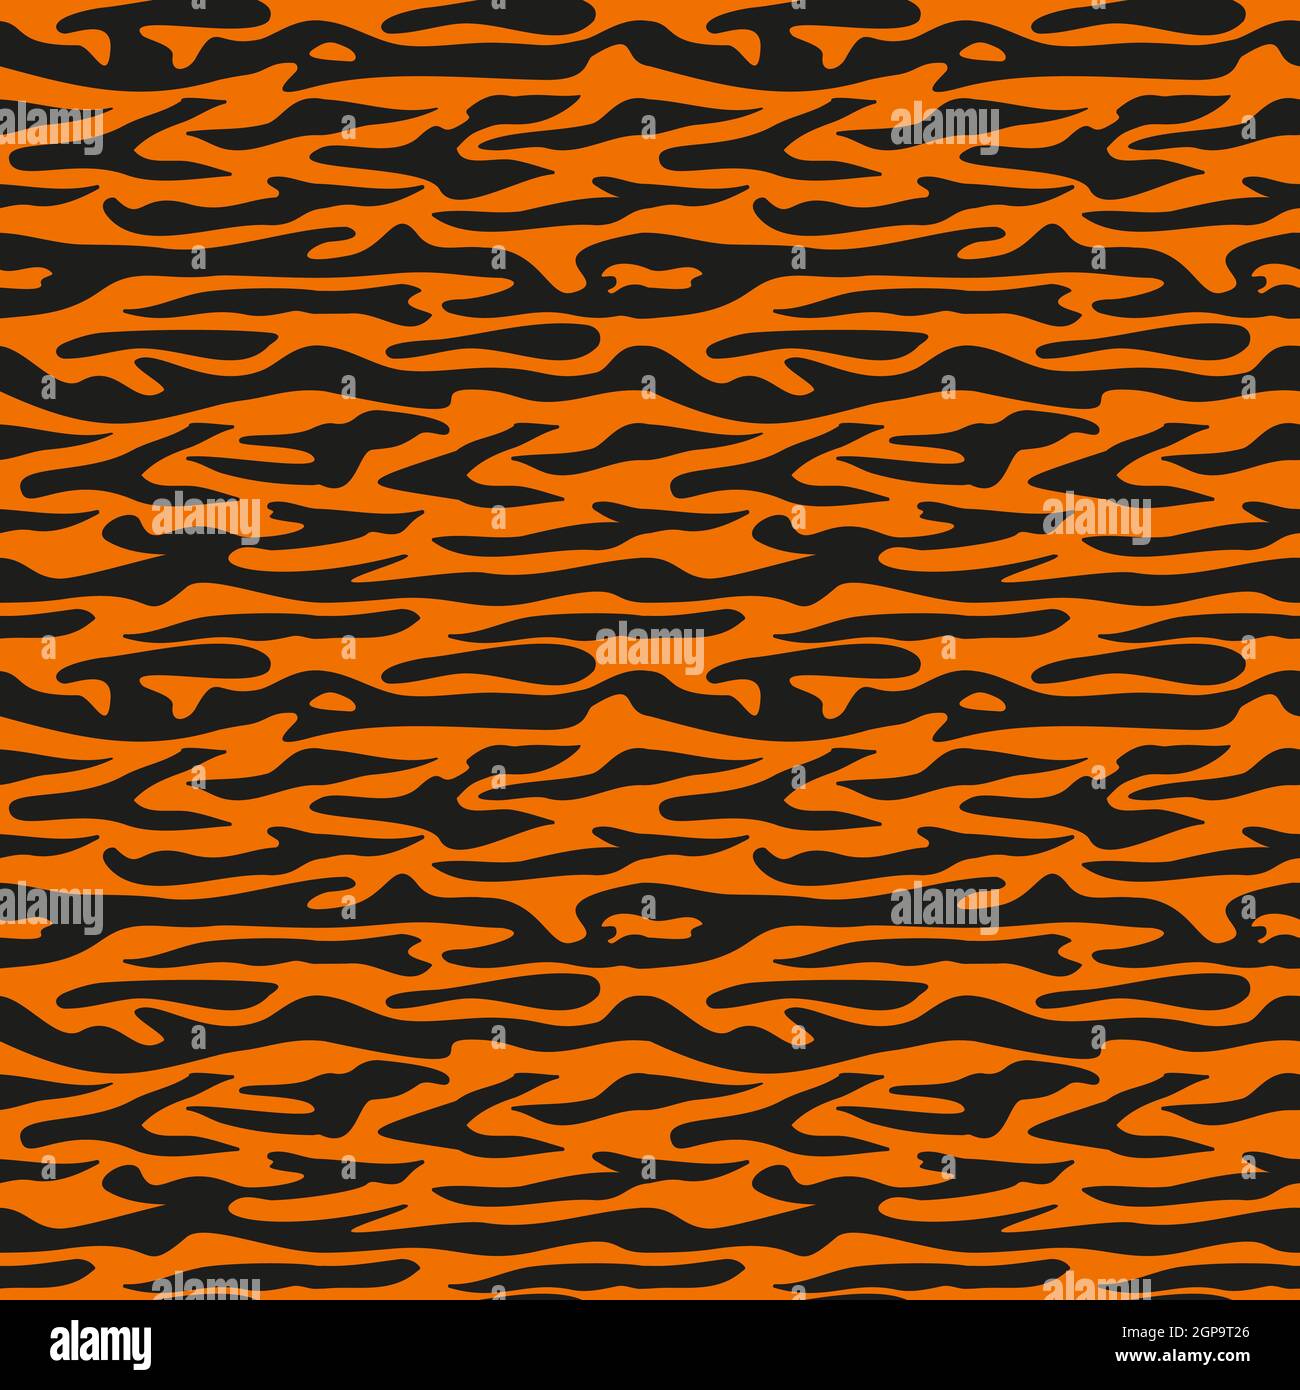 Seamless pattern of black stripes tiger on orange background. Bright print for the holiday, symbol of new year, festive design Stock Vector